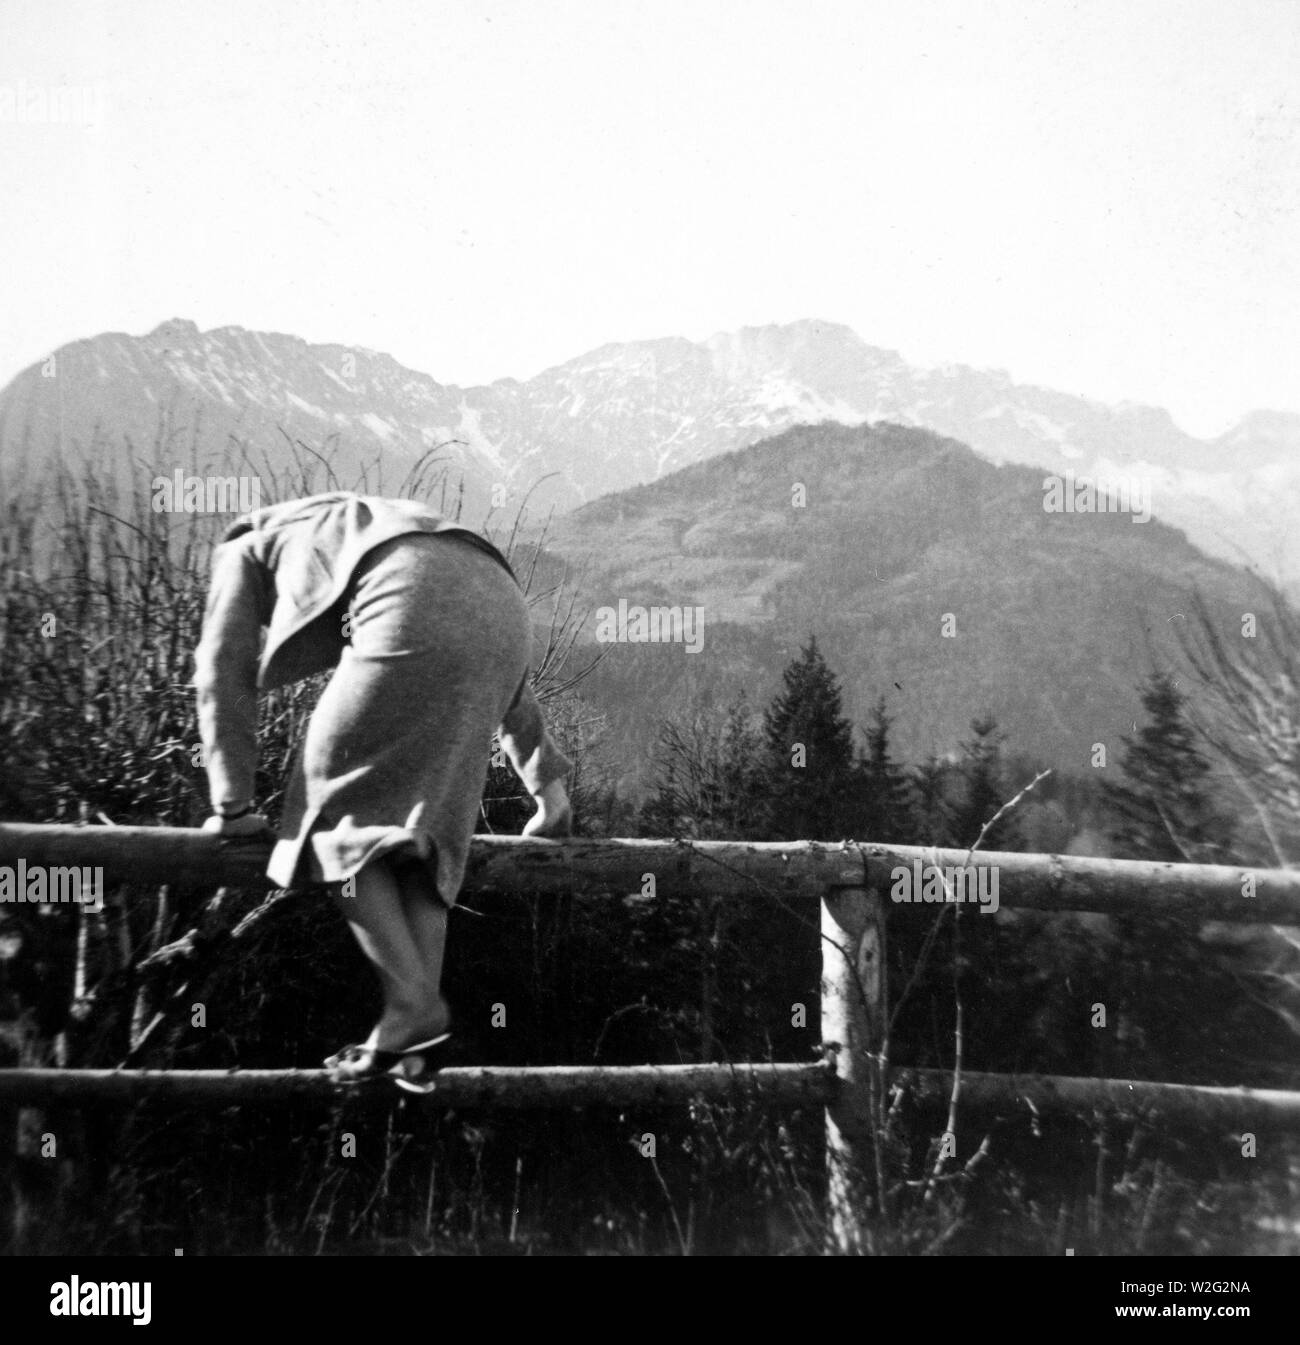 Eva Braun Collection (album 3)  - Woman climbing a fence in 1930s or 1940s Germany Stock Photo